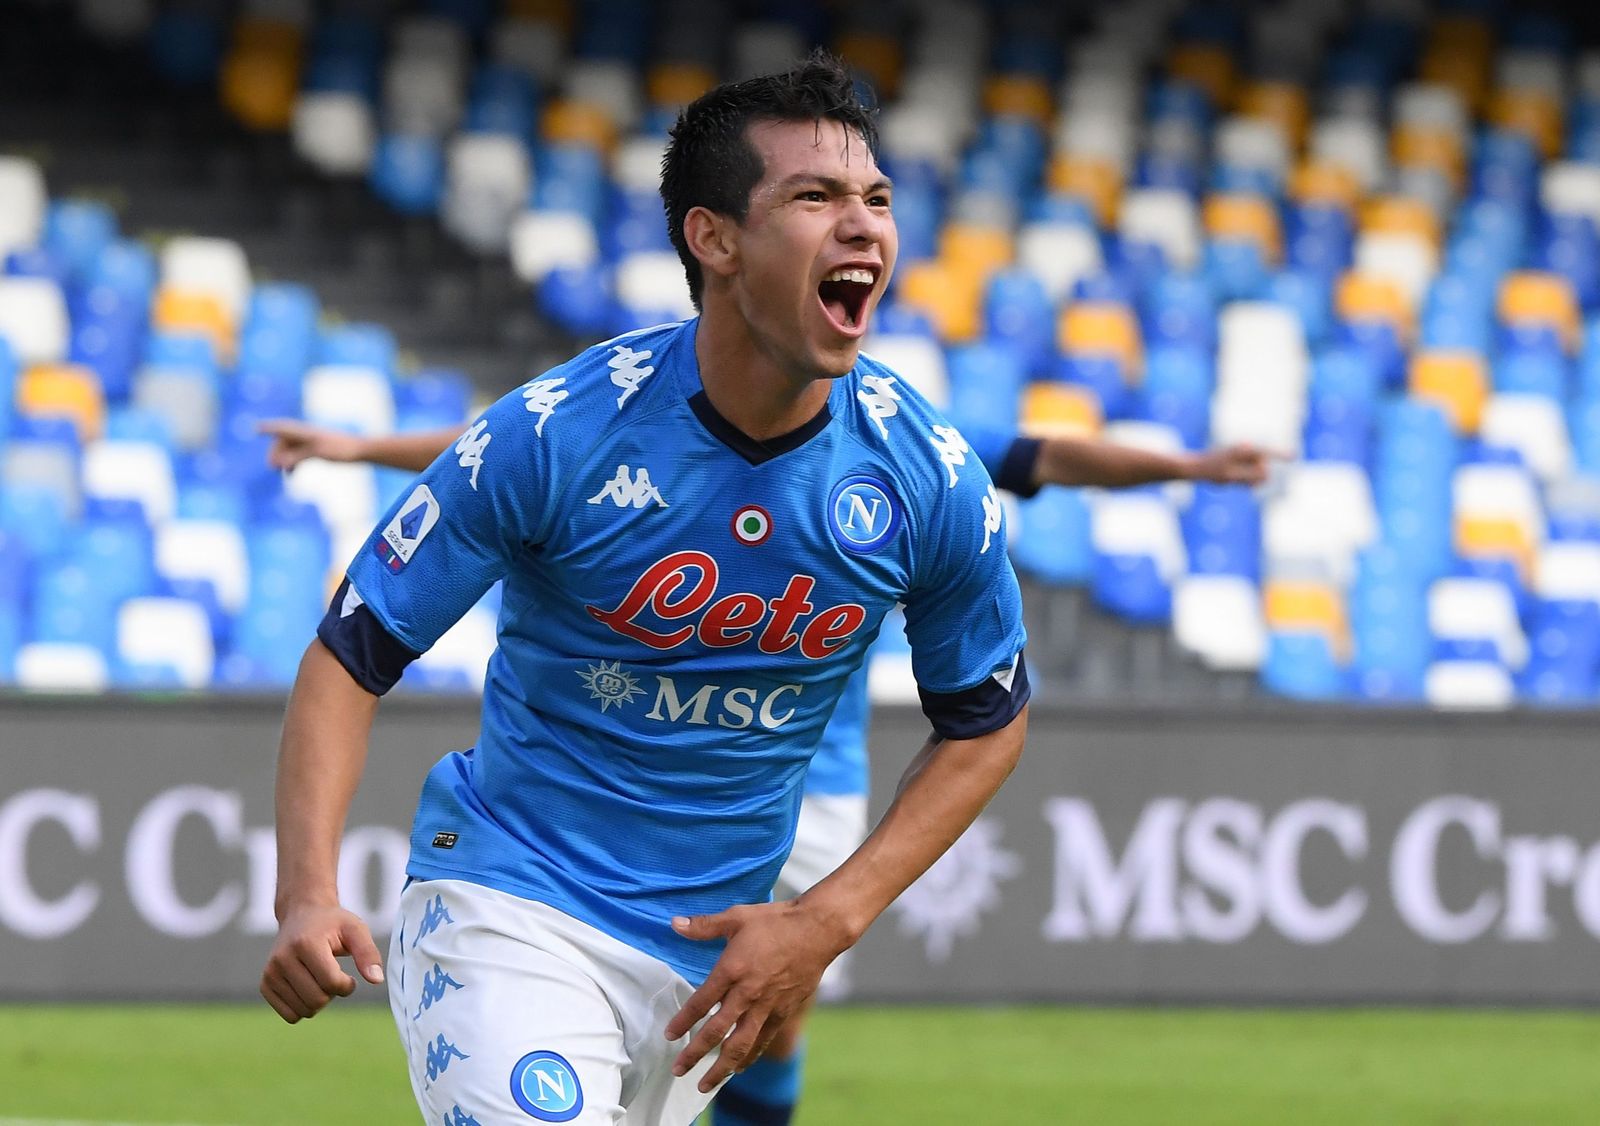 Hirving Lozano thriving for in-form Napoli after overcoming difficult start  - International Champions Cup